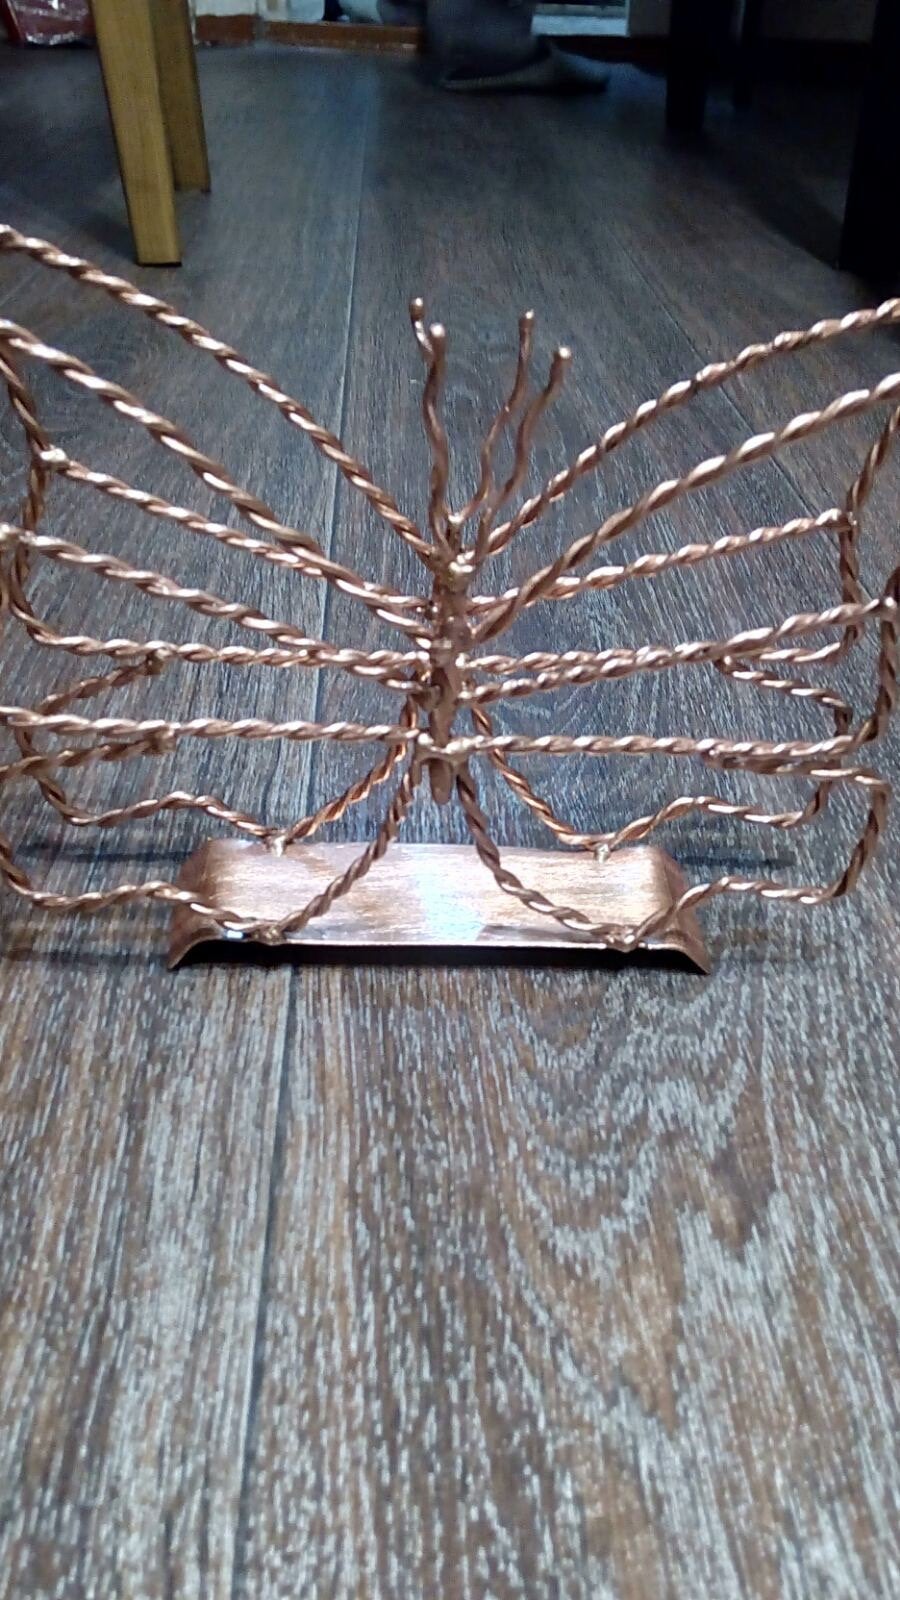 7th anniversary gift, custom jewelry, napkin holder, 7 year gifts, copper napkin holder, copper anniversary, butterfly, gift for wife